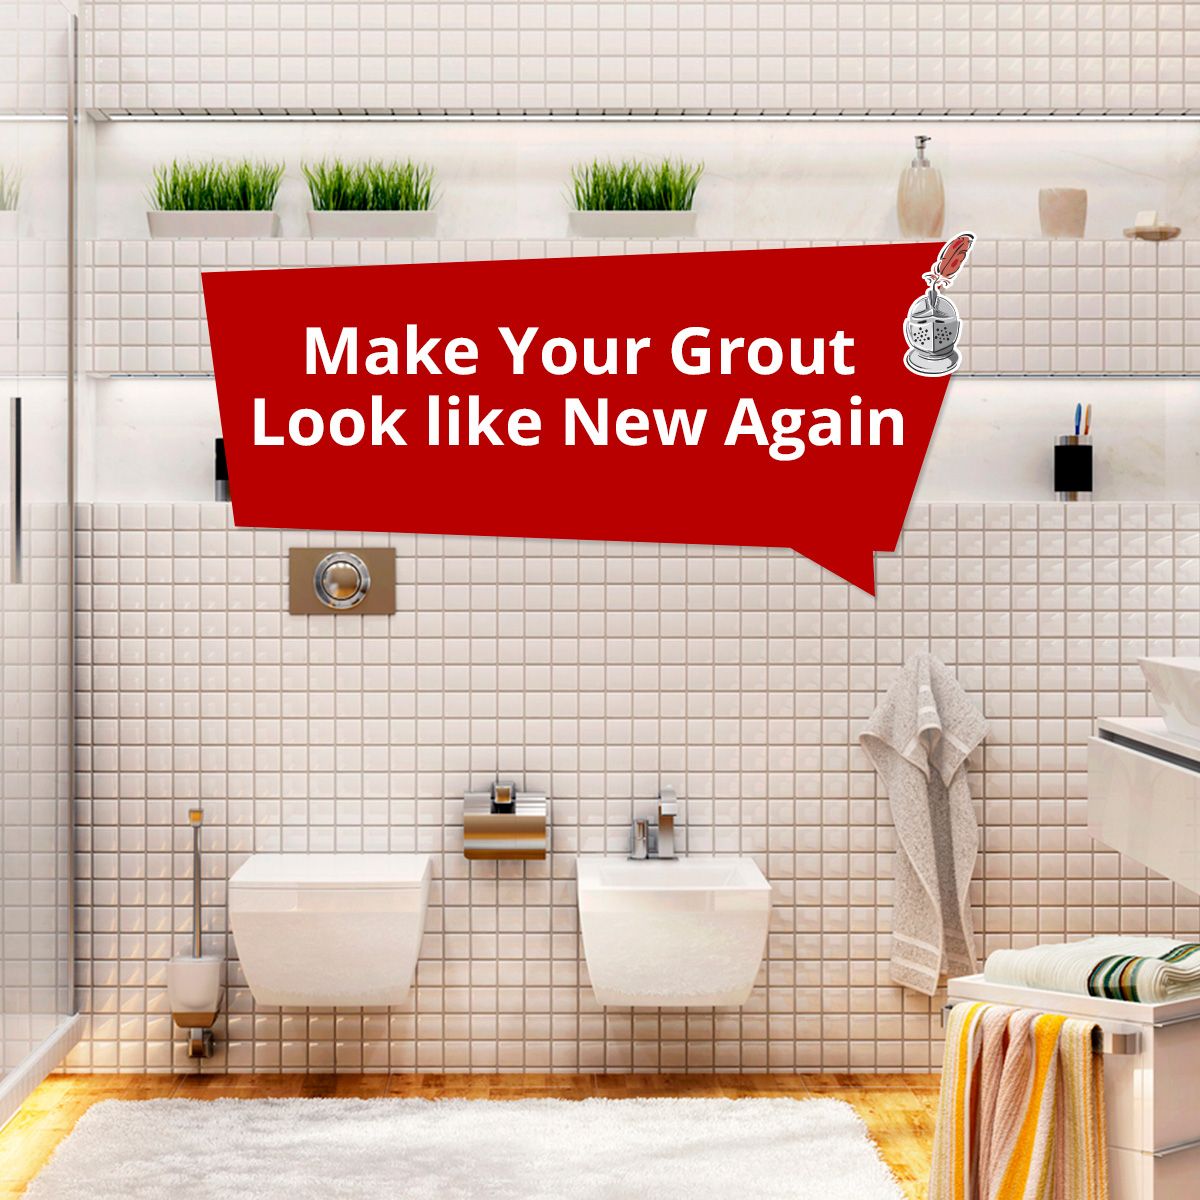 Make Your Grout Look like New Again